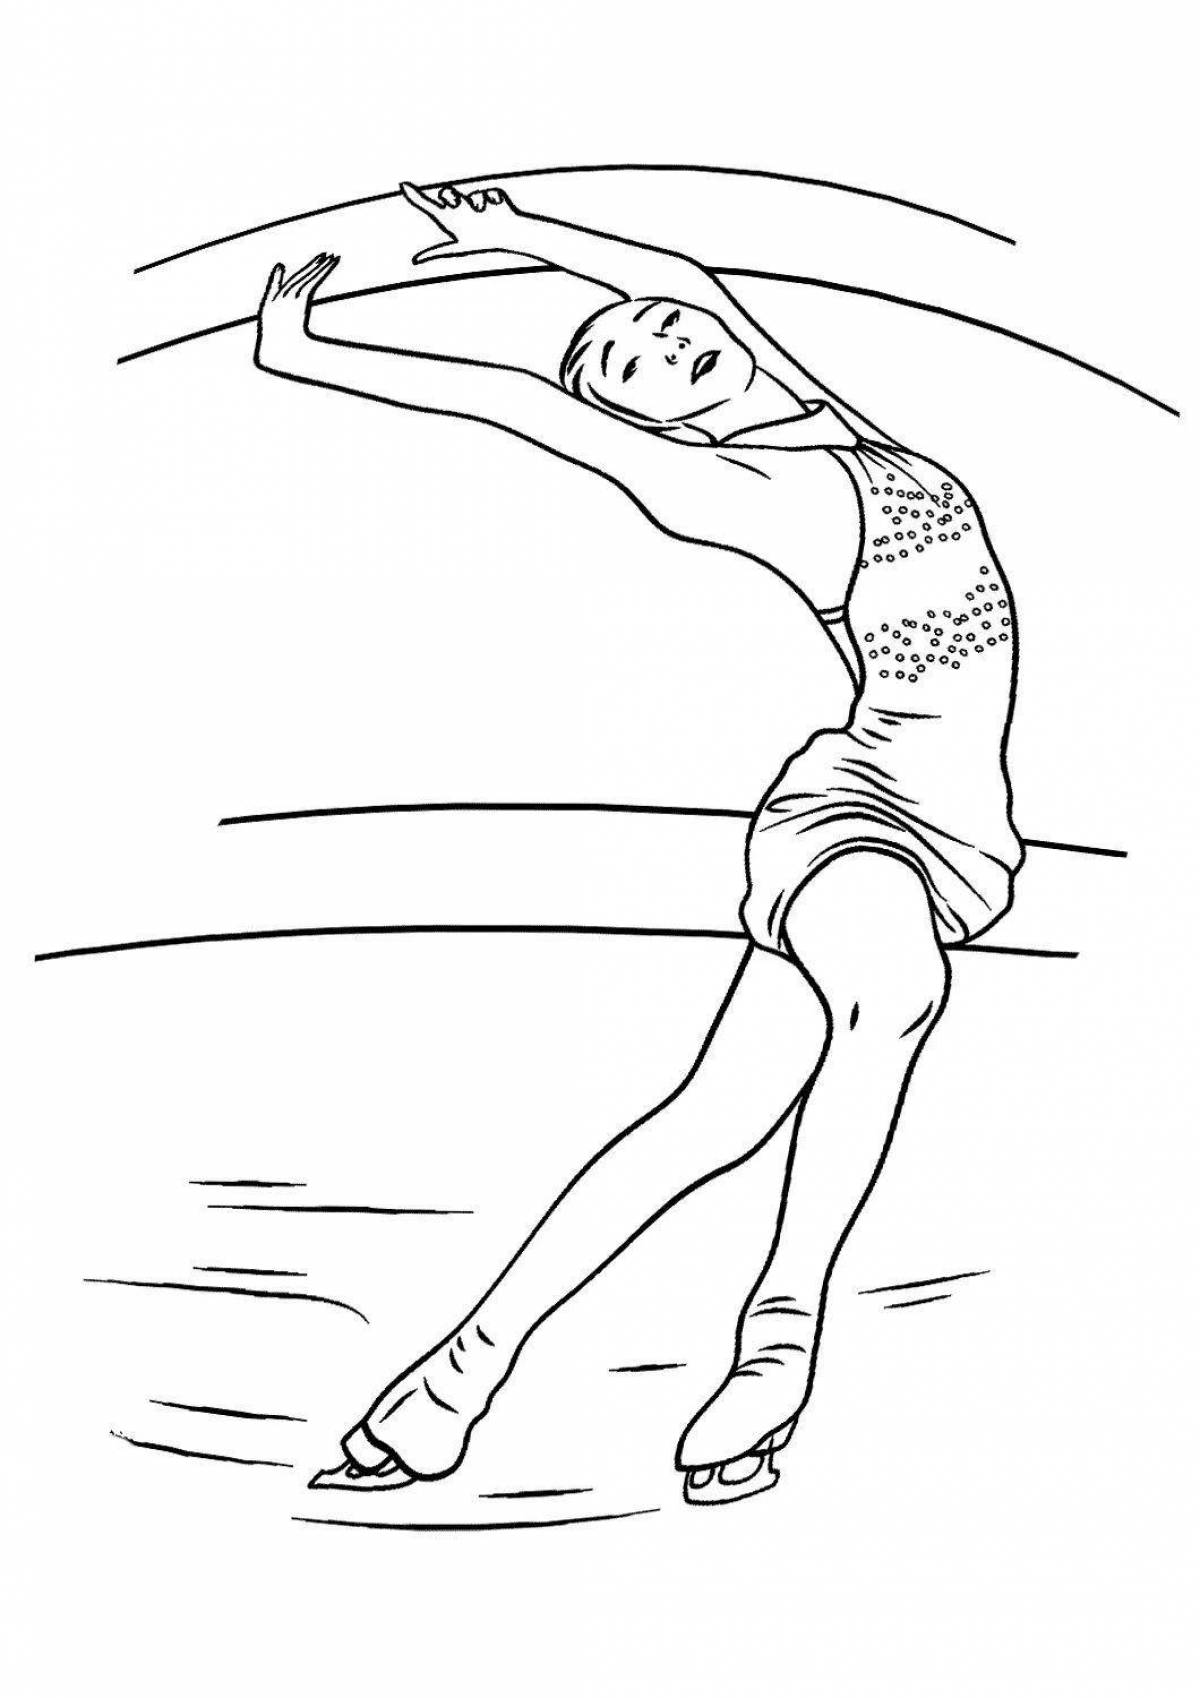 Exciting figure skater coloring book for kids